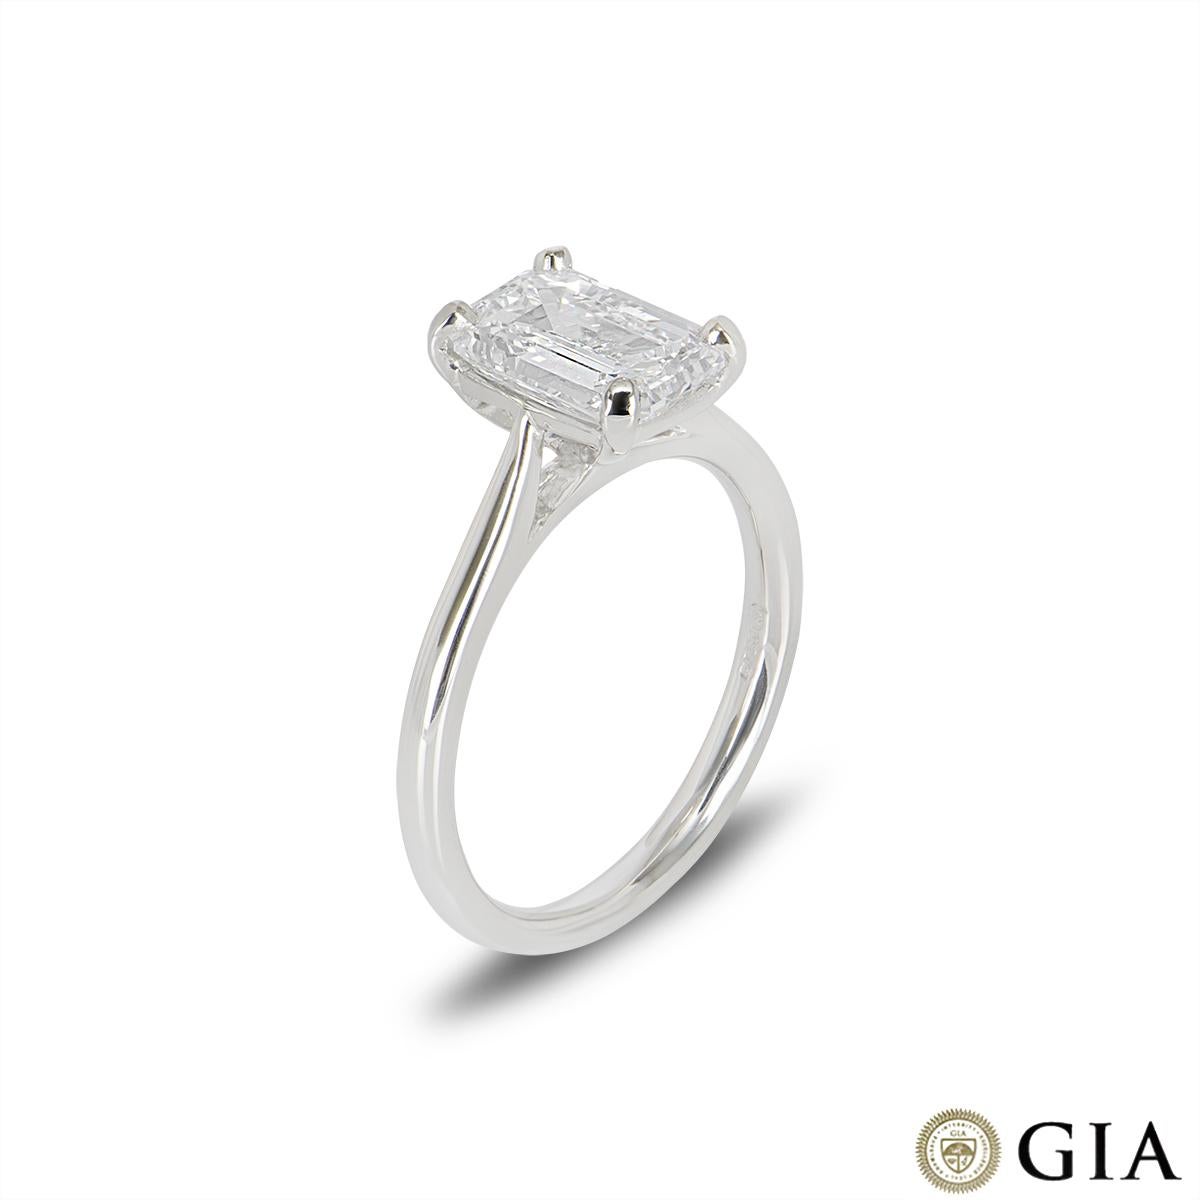 A stunning platinum emerald cut diamond ring. The diamond is set within a classic 4 claw setting and weighs 2.01ct, D colour and Flawless clarity. This spectacular emerald cut is certified as a Type 2a diamond from the renowned Golconda region,